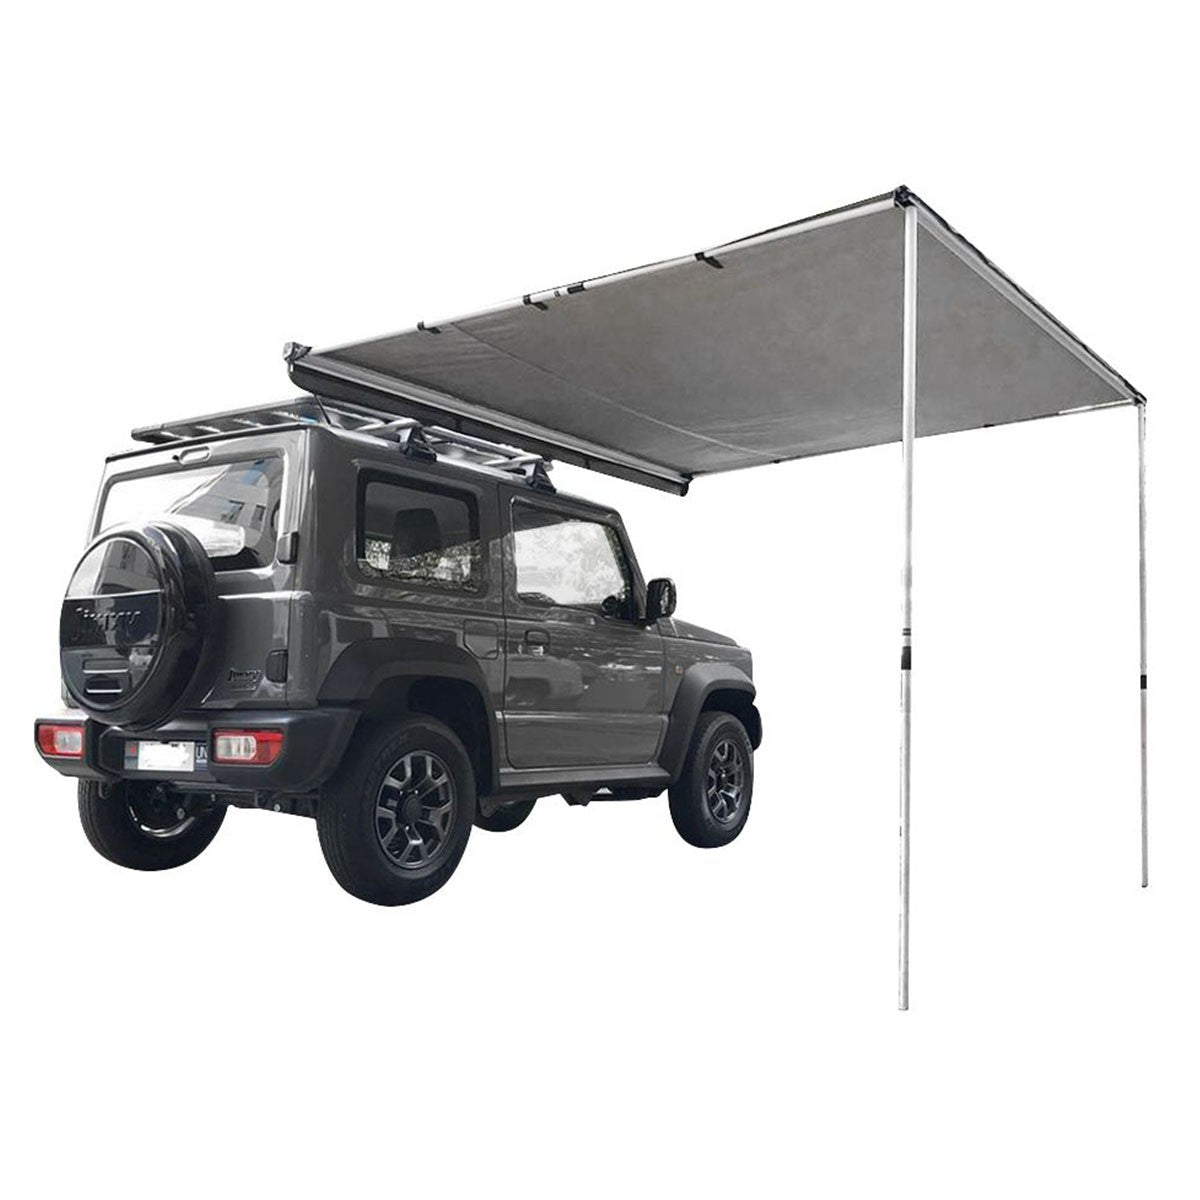 2 METRE FRONTIER 200 DLX 4WD AWNING